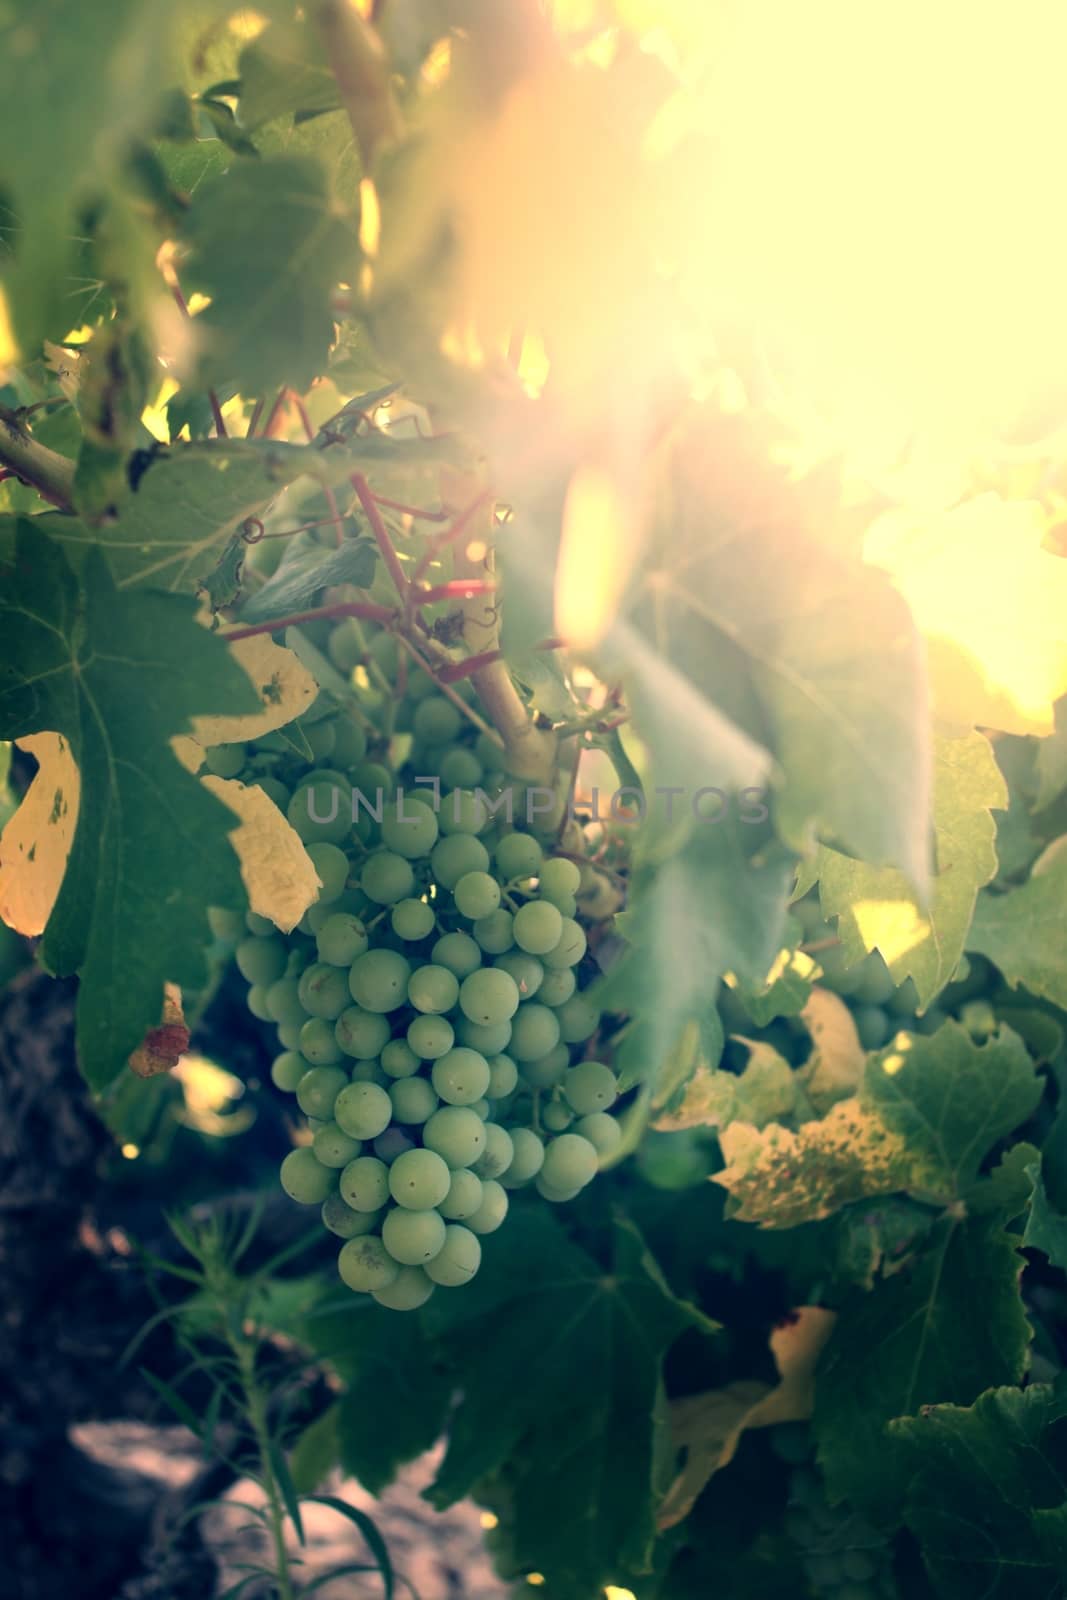 Grapes in the vineyard at sunset, autumn harvest